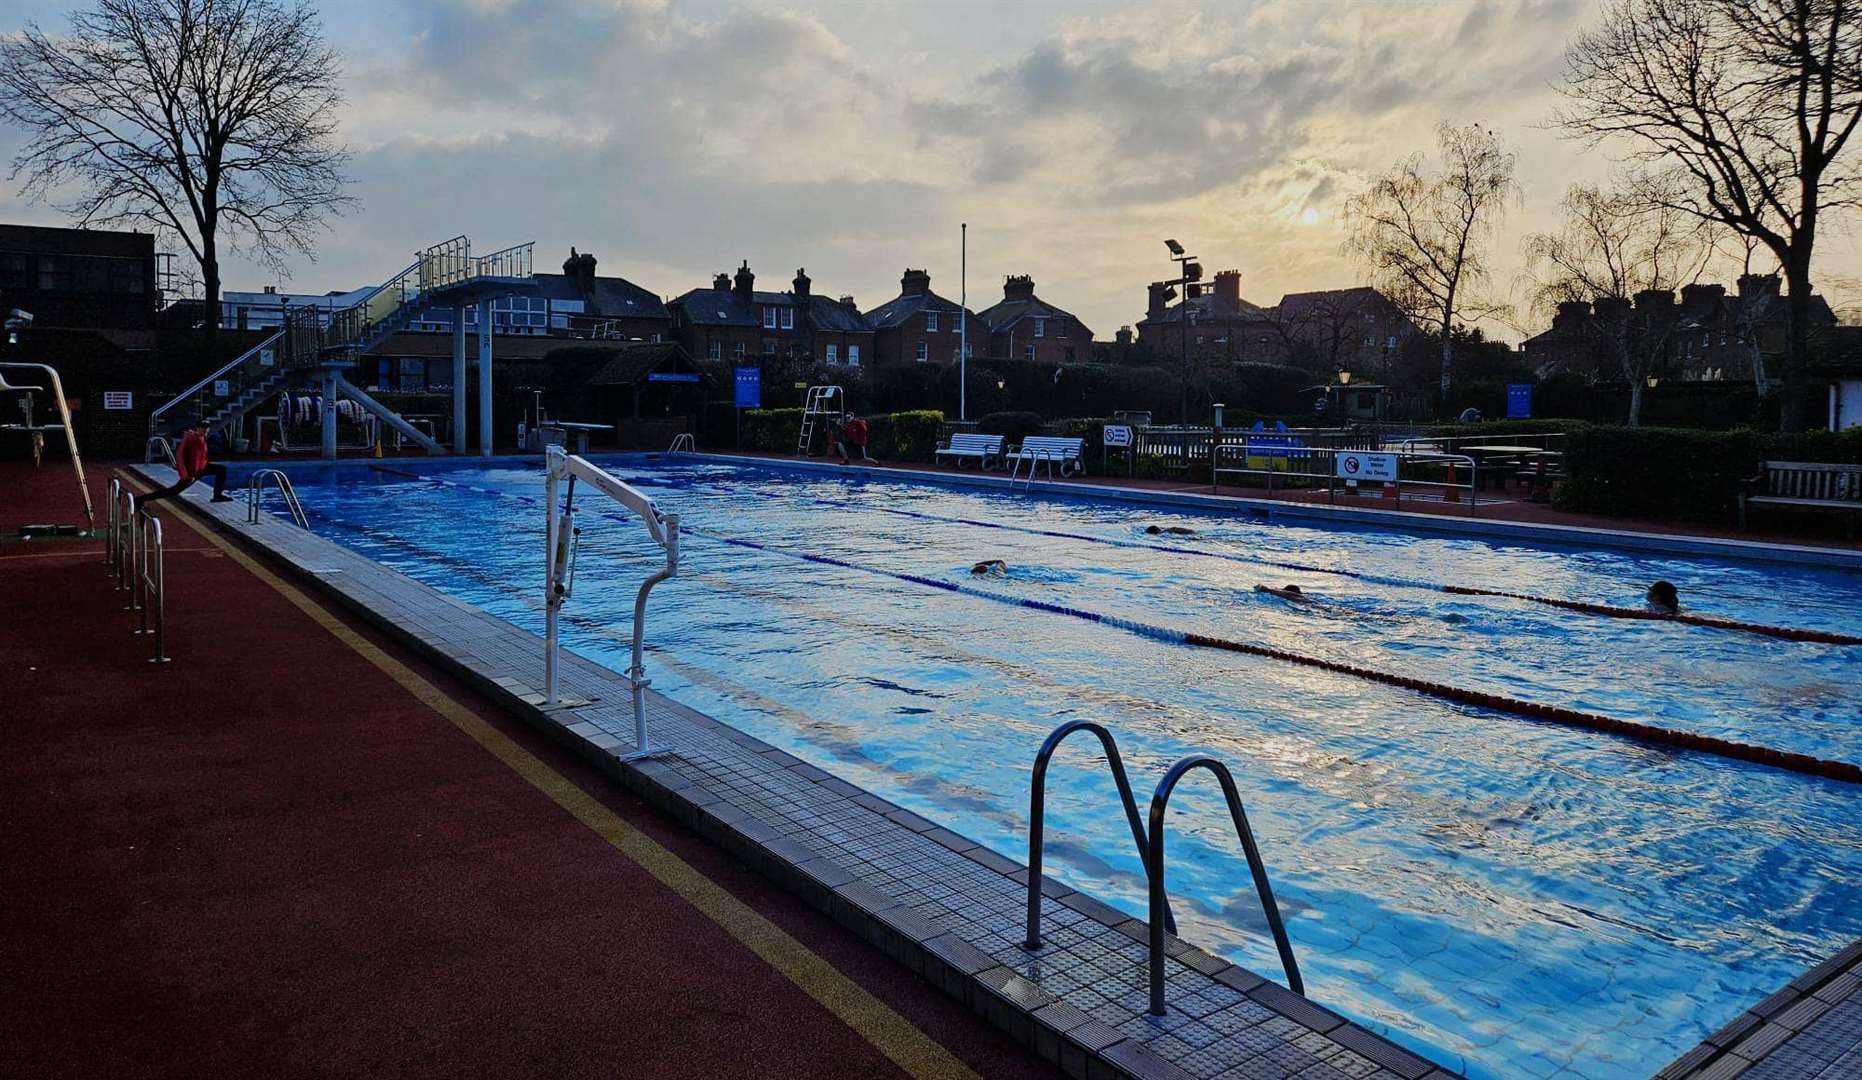 Faversham Pools have been welcoming swimmers for 60 years